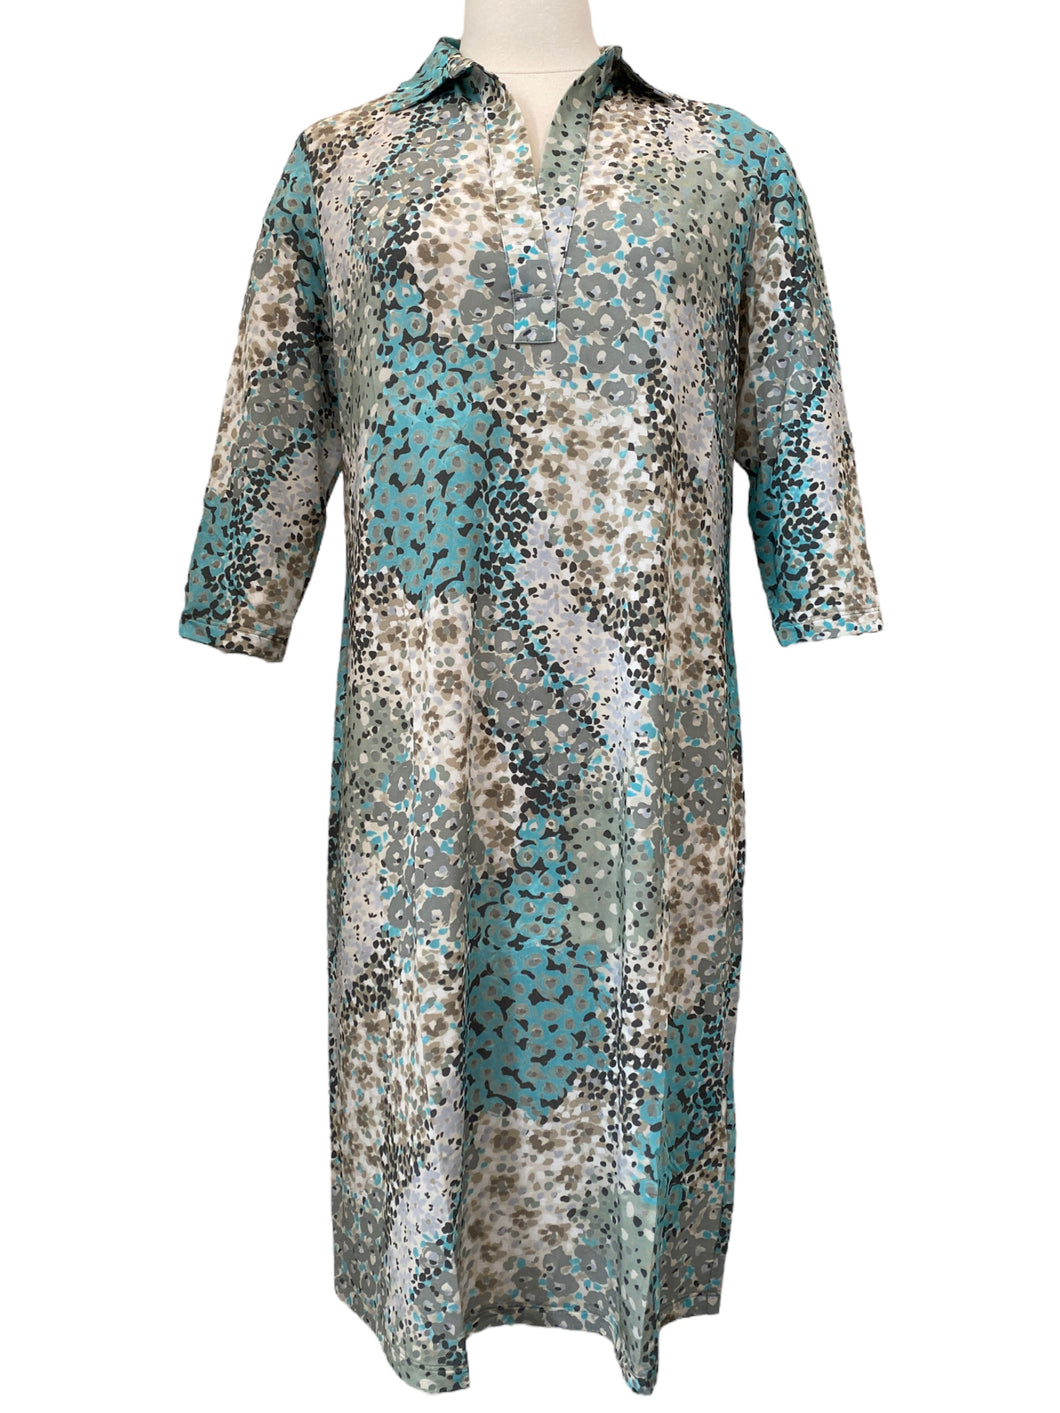 Rosso35 Jersey Dress in Sage and Turquoise